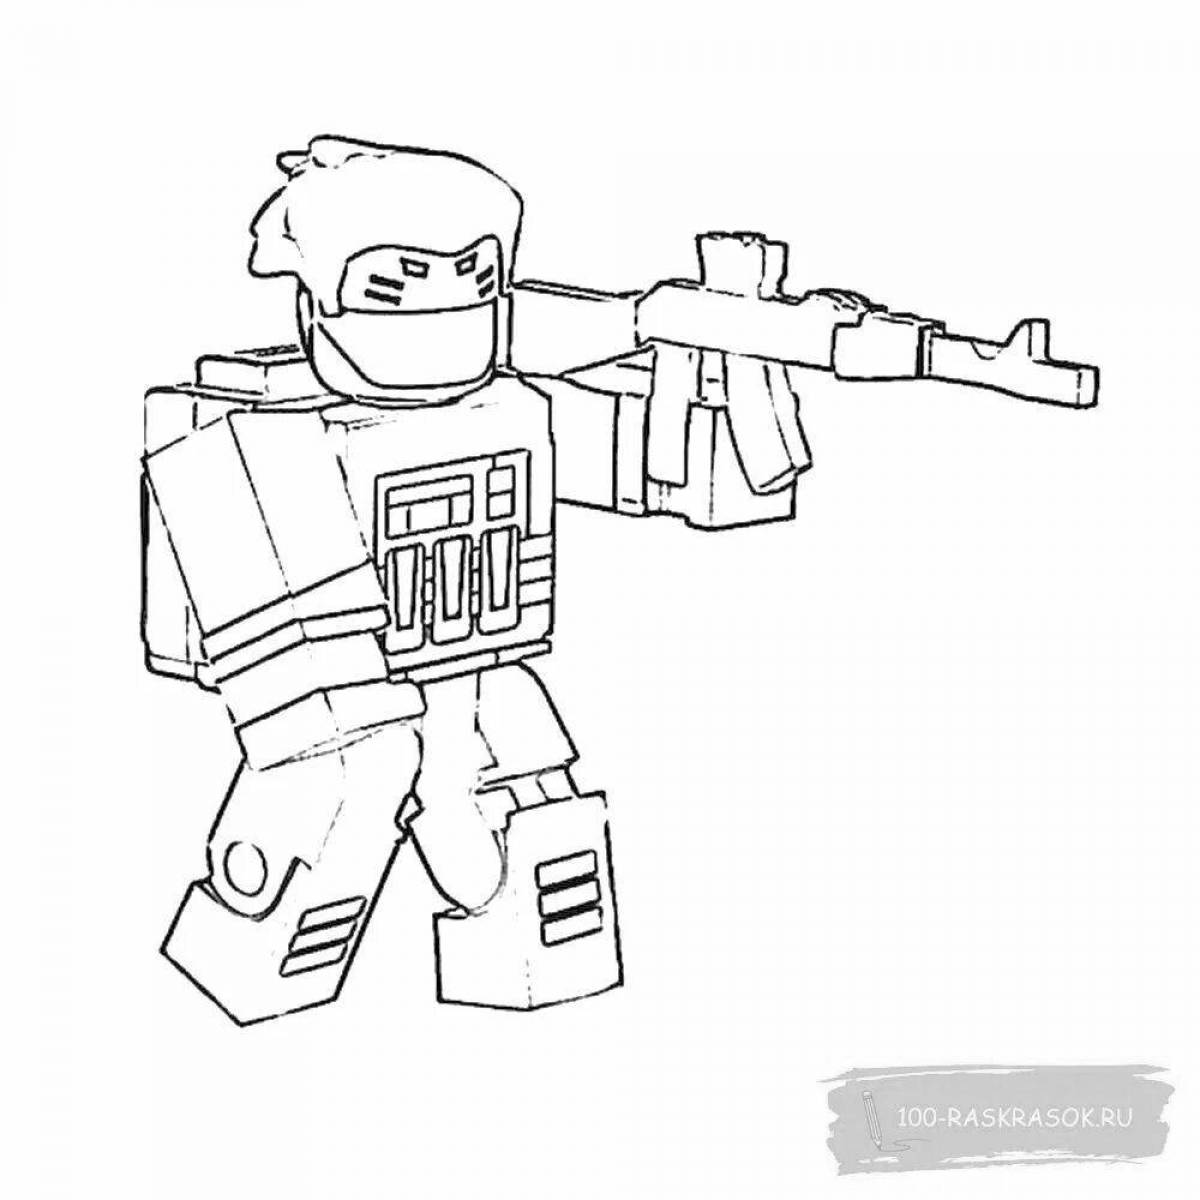 Charming roblox character coloring page